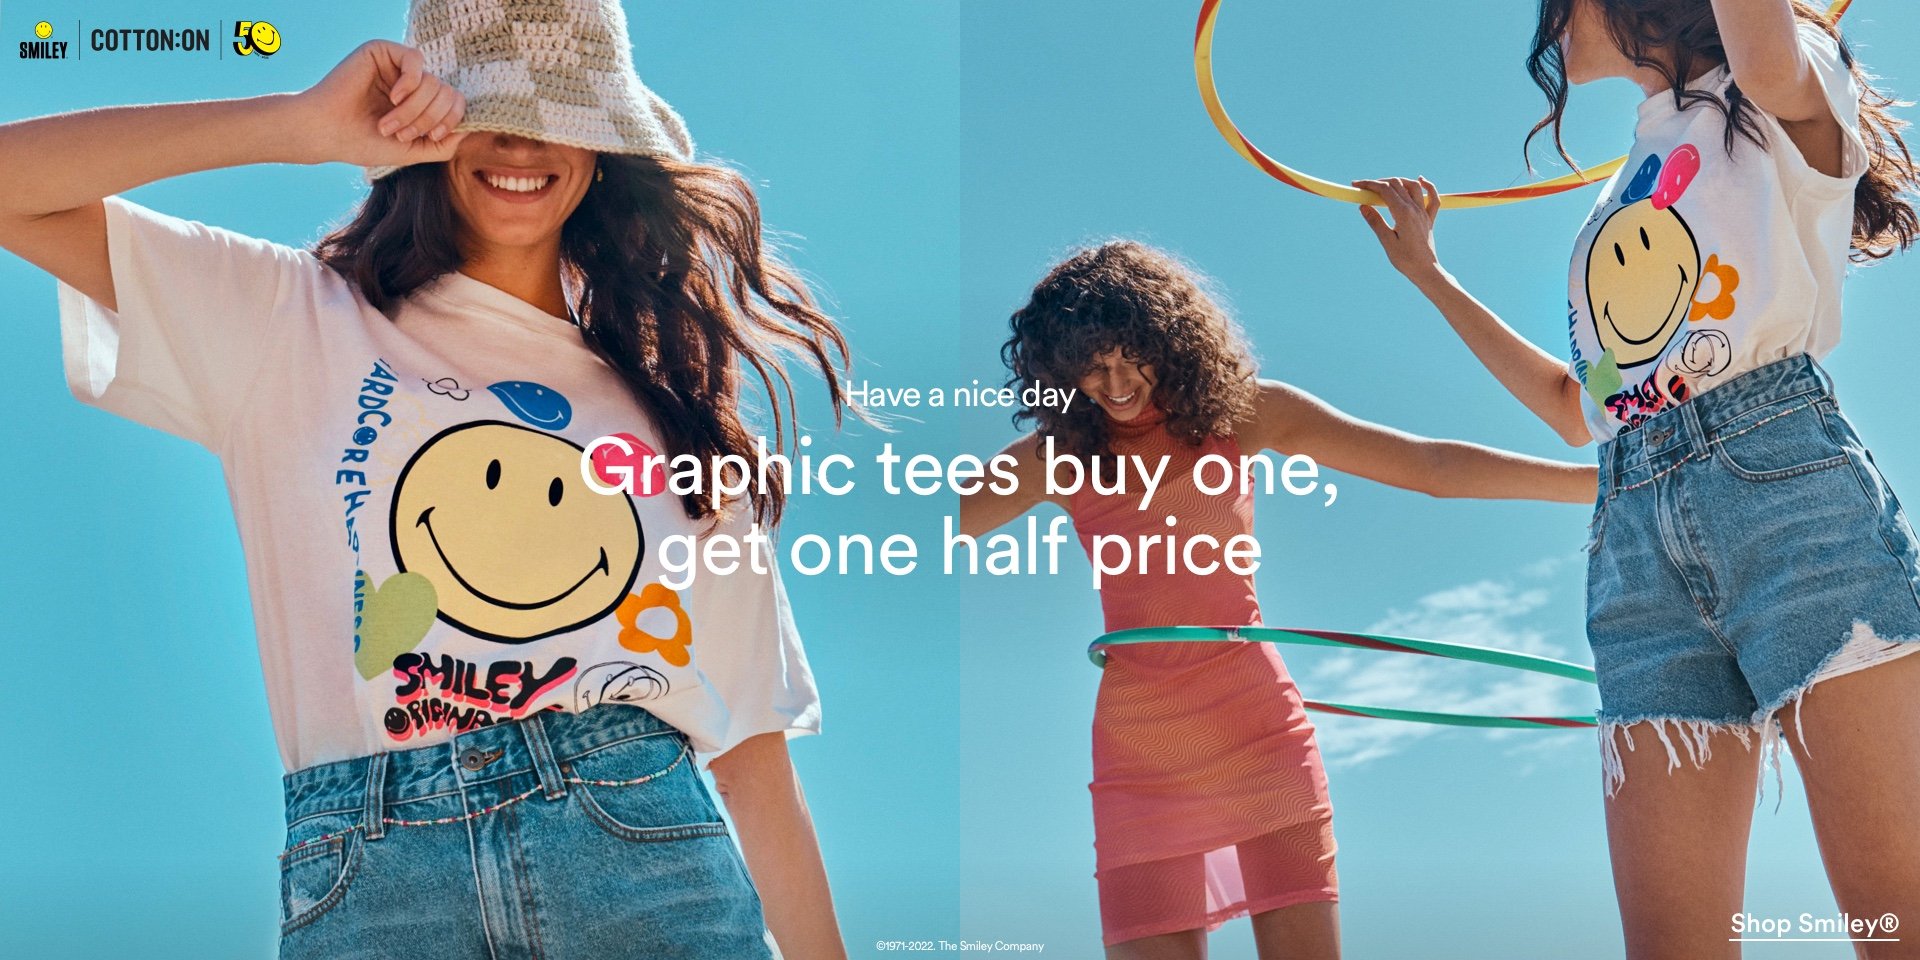 Graphic Tees. Buy One Get One Half Price. Click to Shop Smiley.